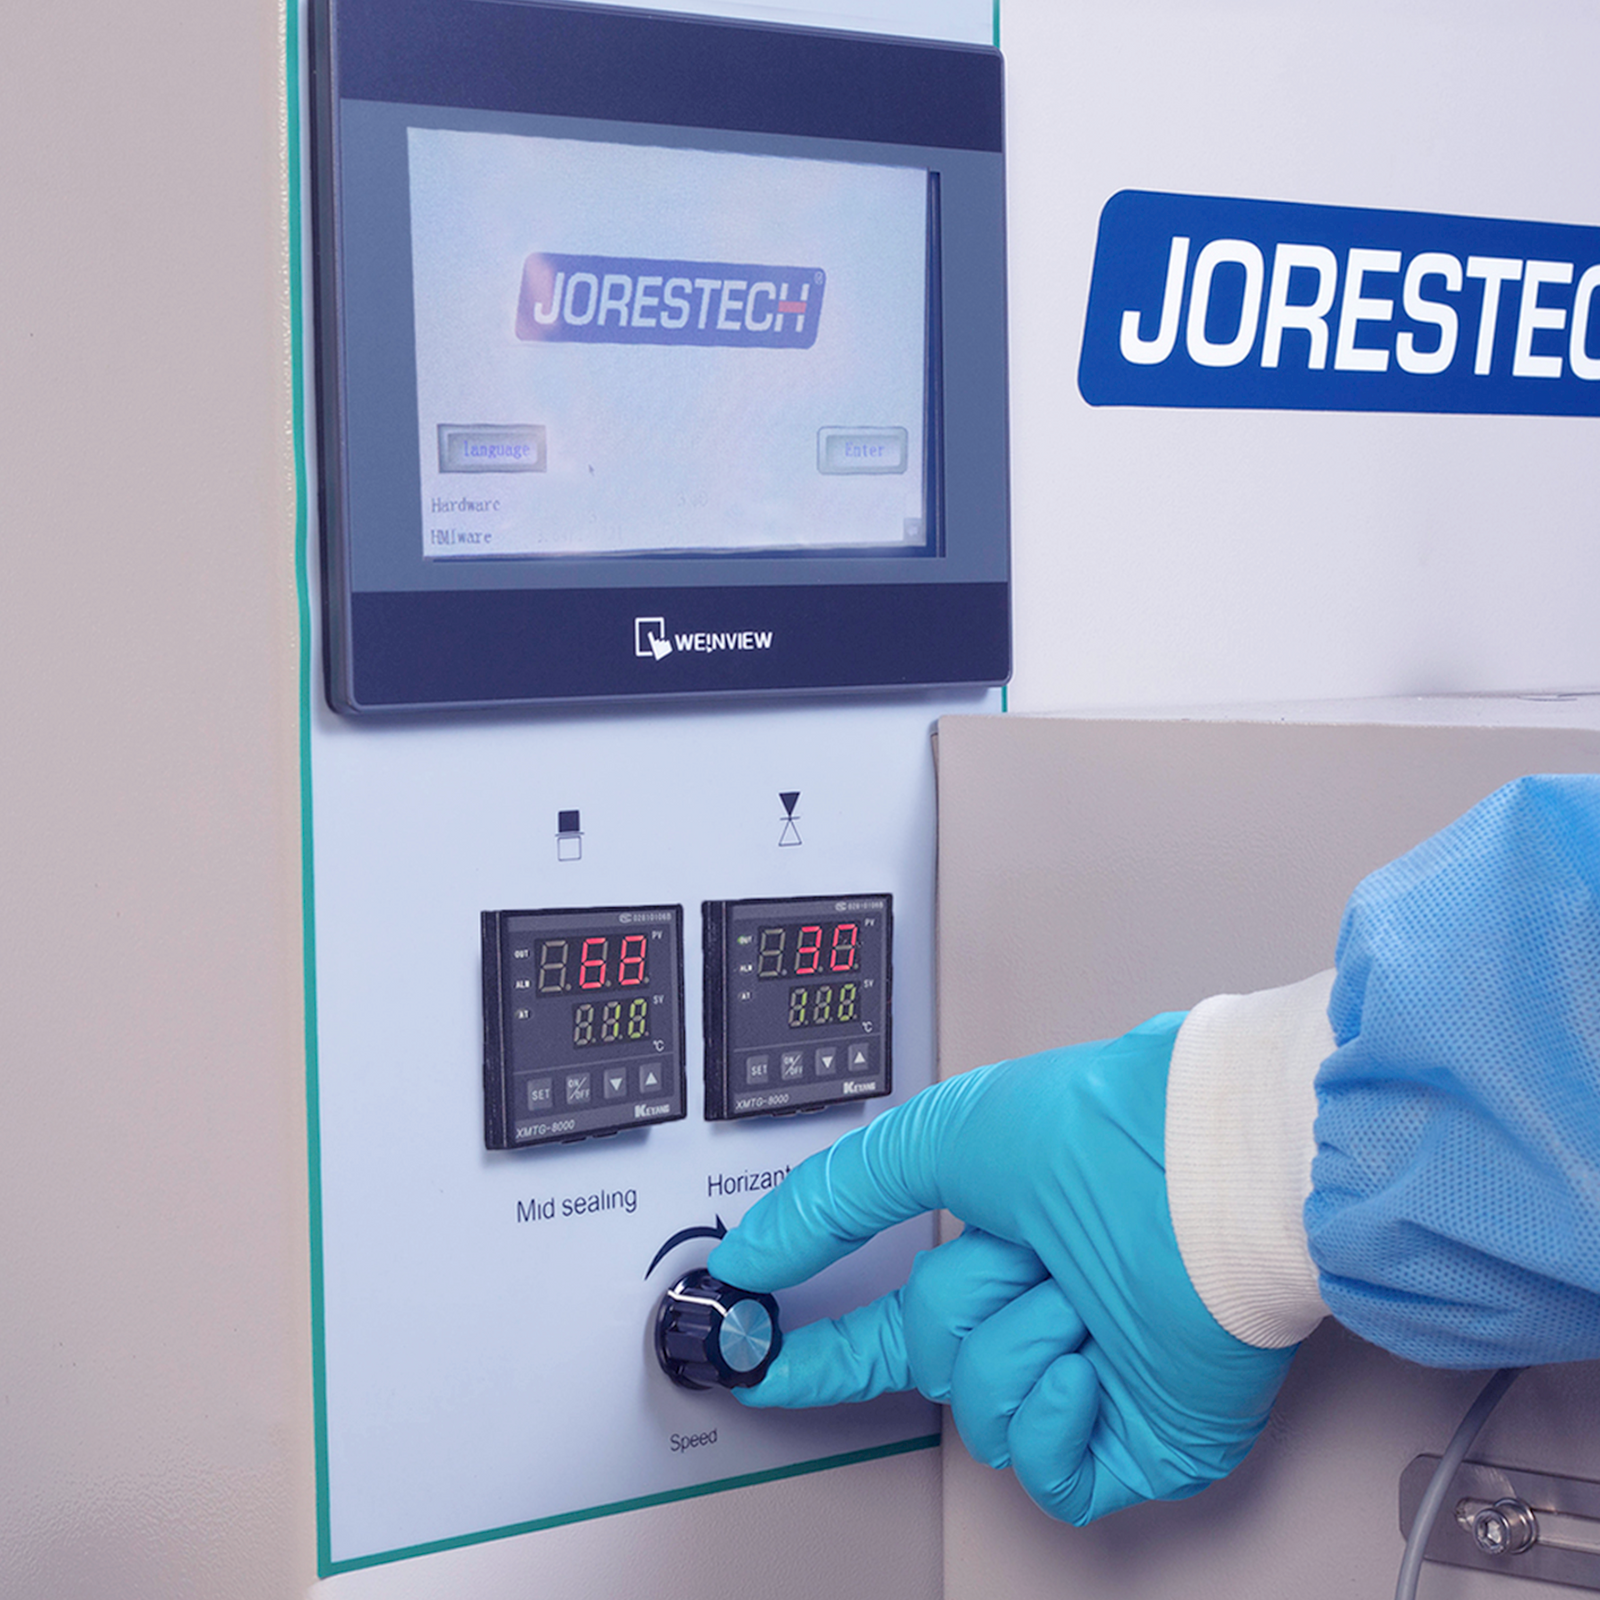 Operator wearing a blue PPE disposable glove is seen operating a Horizontal HFFS flow pack machine. The LCD screen display is shown, along with a few of the machine's control features